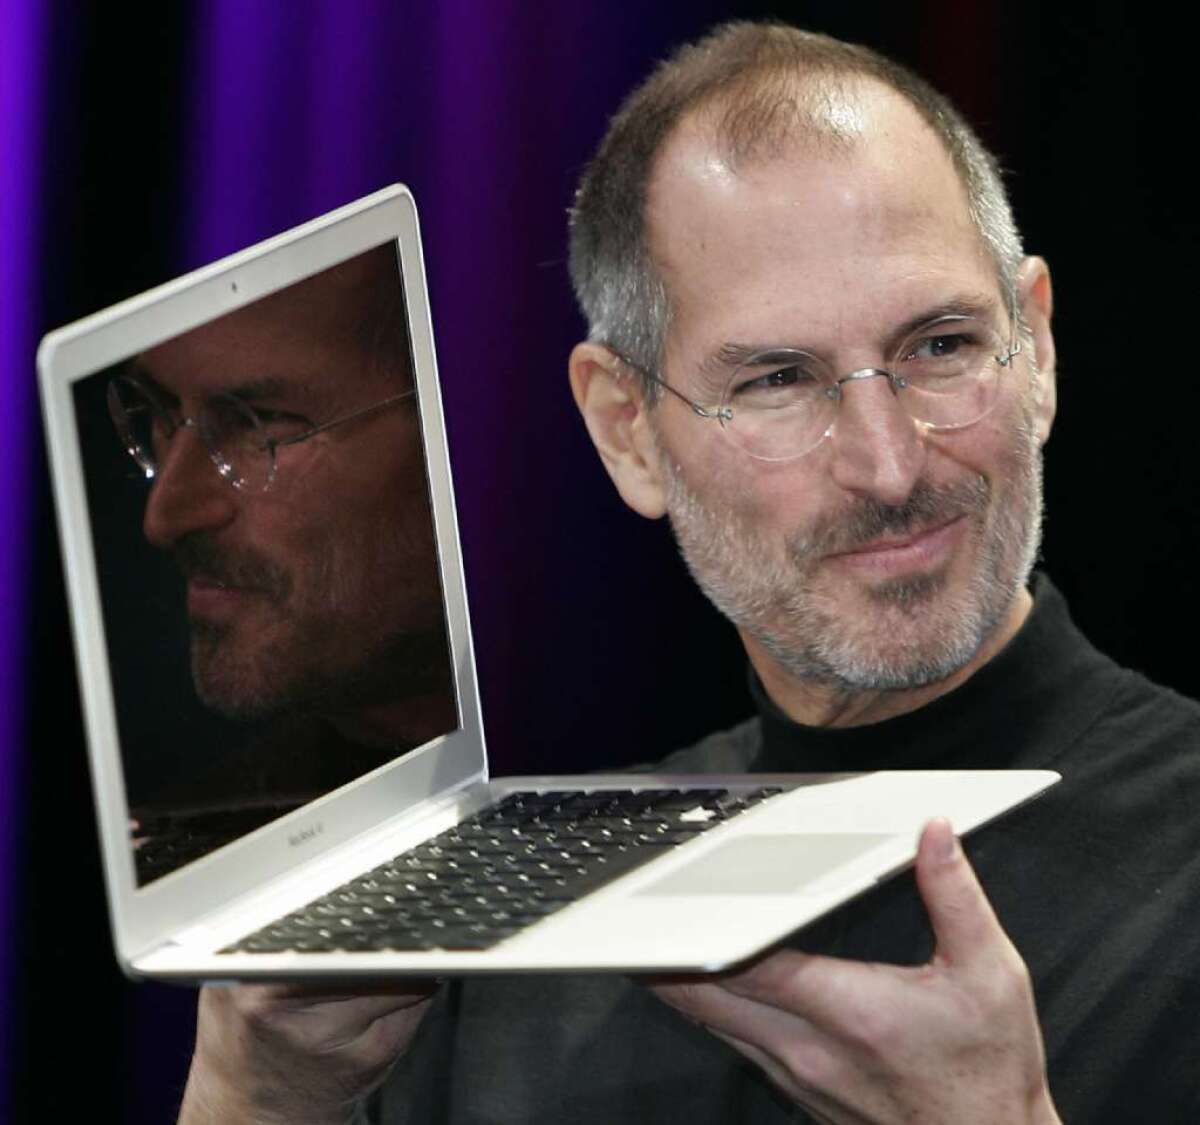 He's no longer with us, guys, get over it: Steve Jobs with the MacBook Air, 2008.